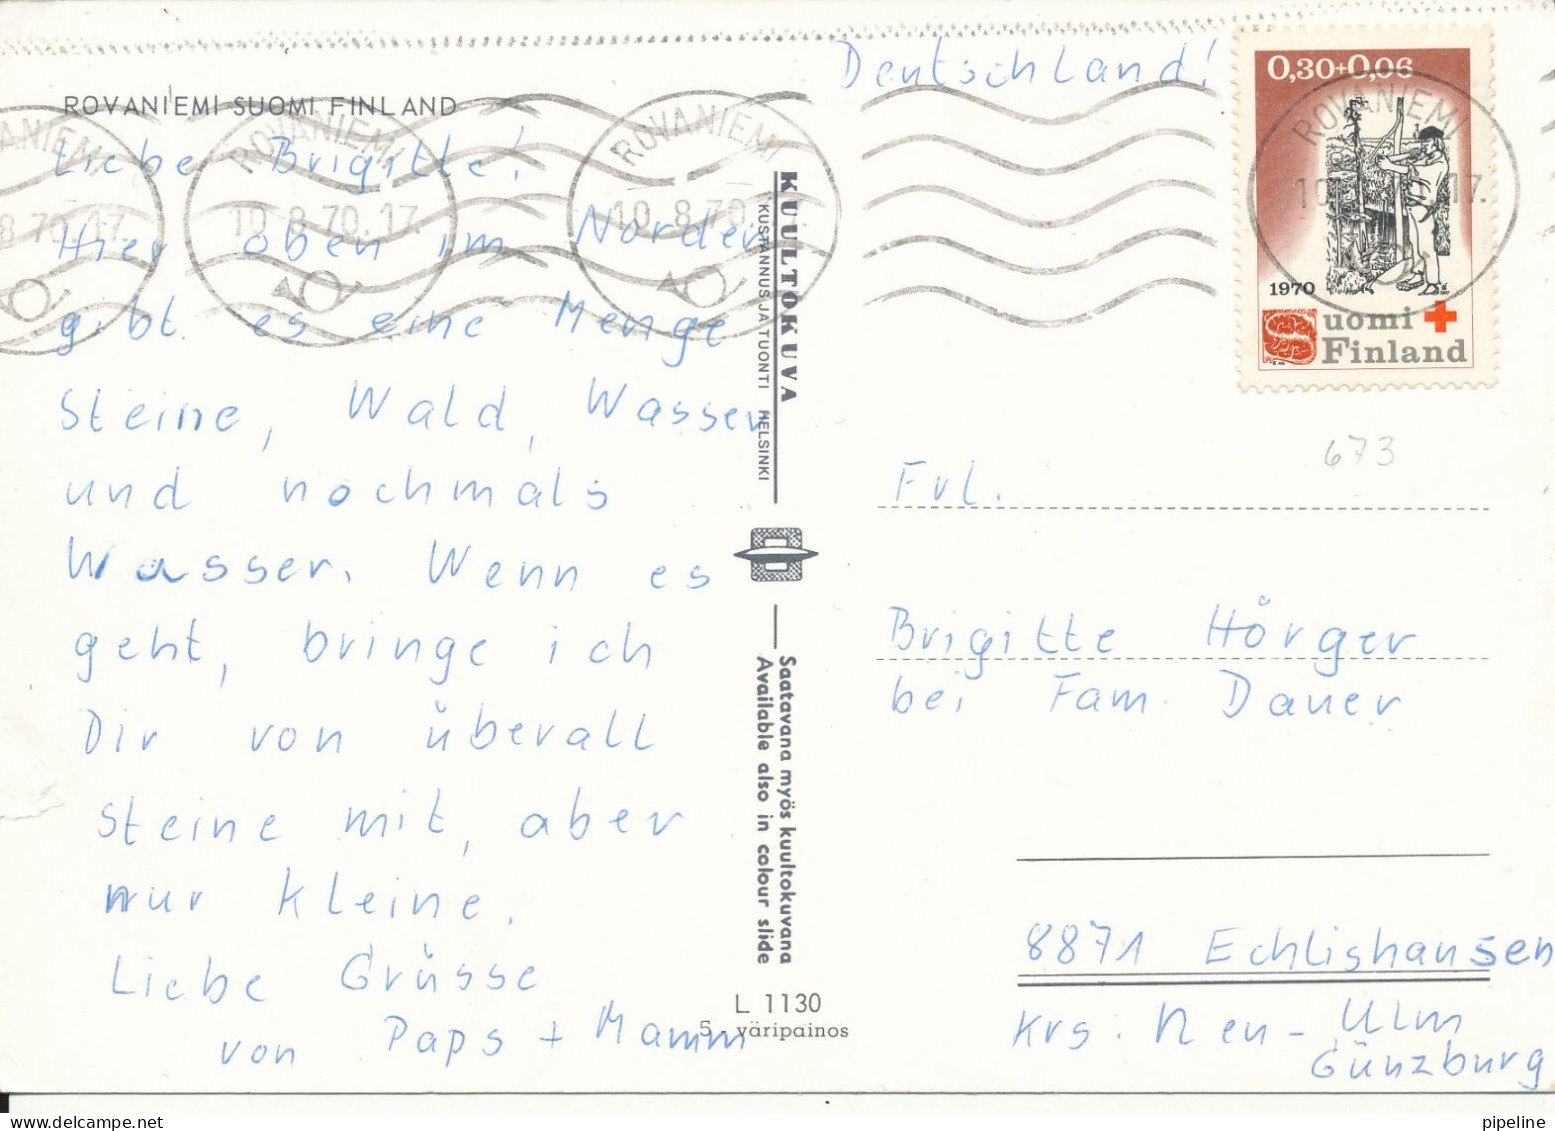 Finland Postcard Send To Germany Rovaniemi 10-8-1970 (Rovaniemi) There Is A Tear In The Right Side Of The Card - Finlandia